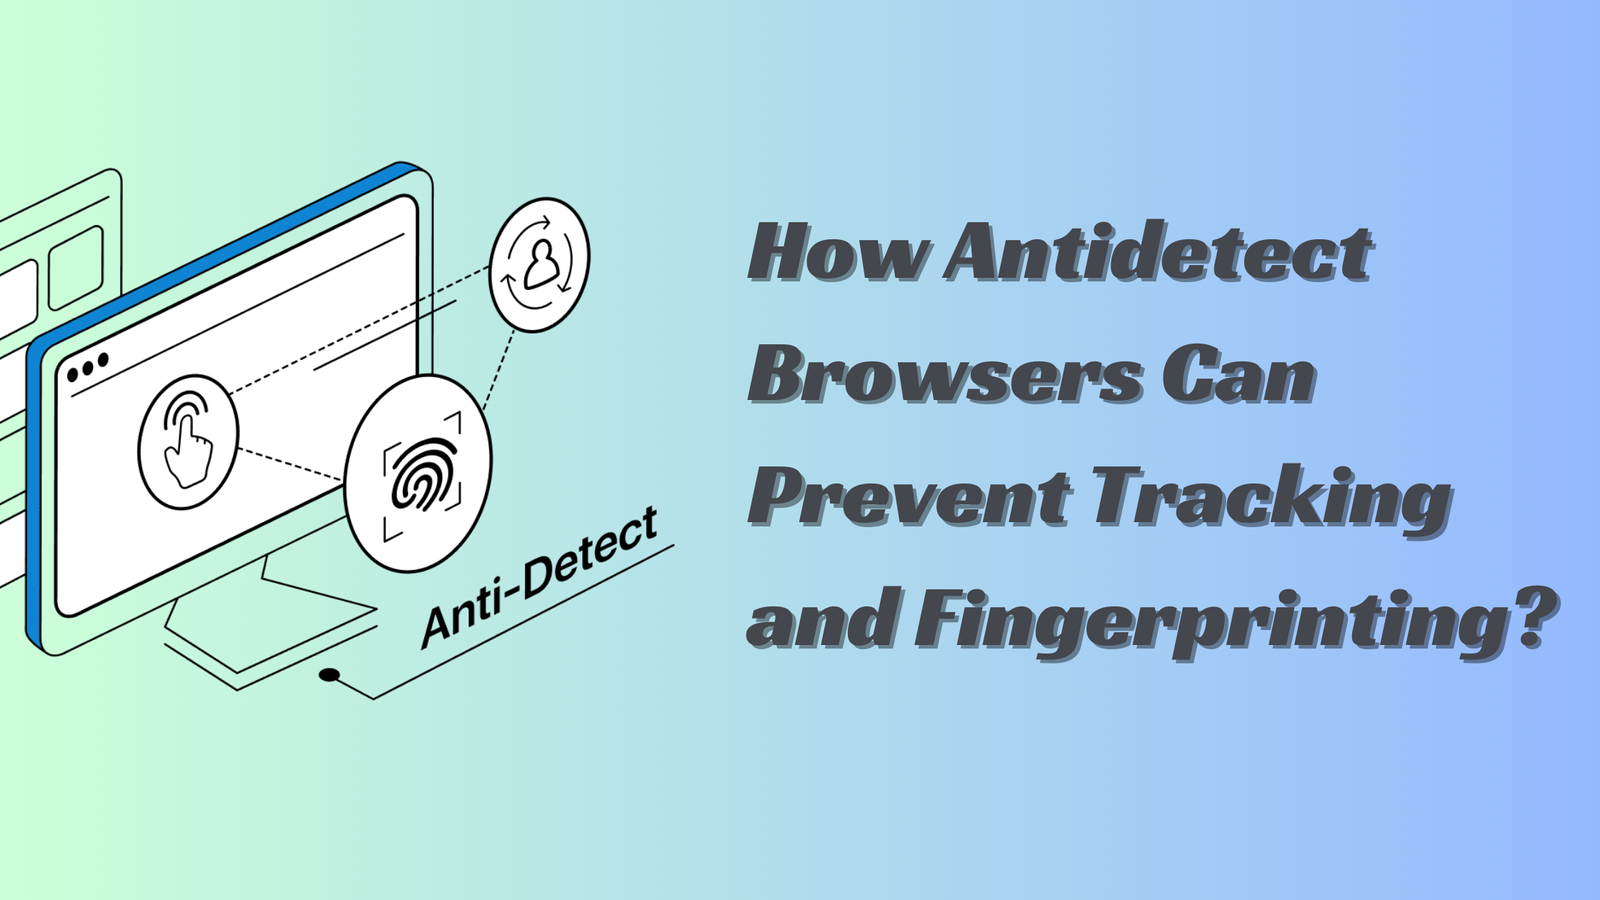 How Antidetect Browsers Can Prevent Tracking and Fingerprinting?